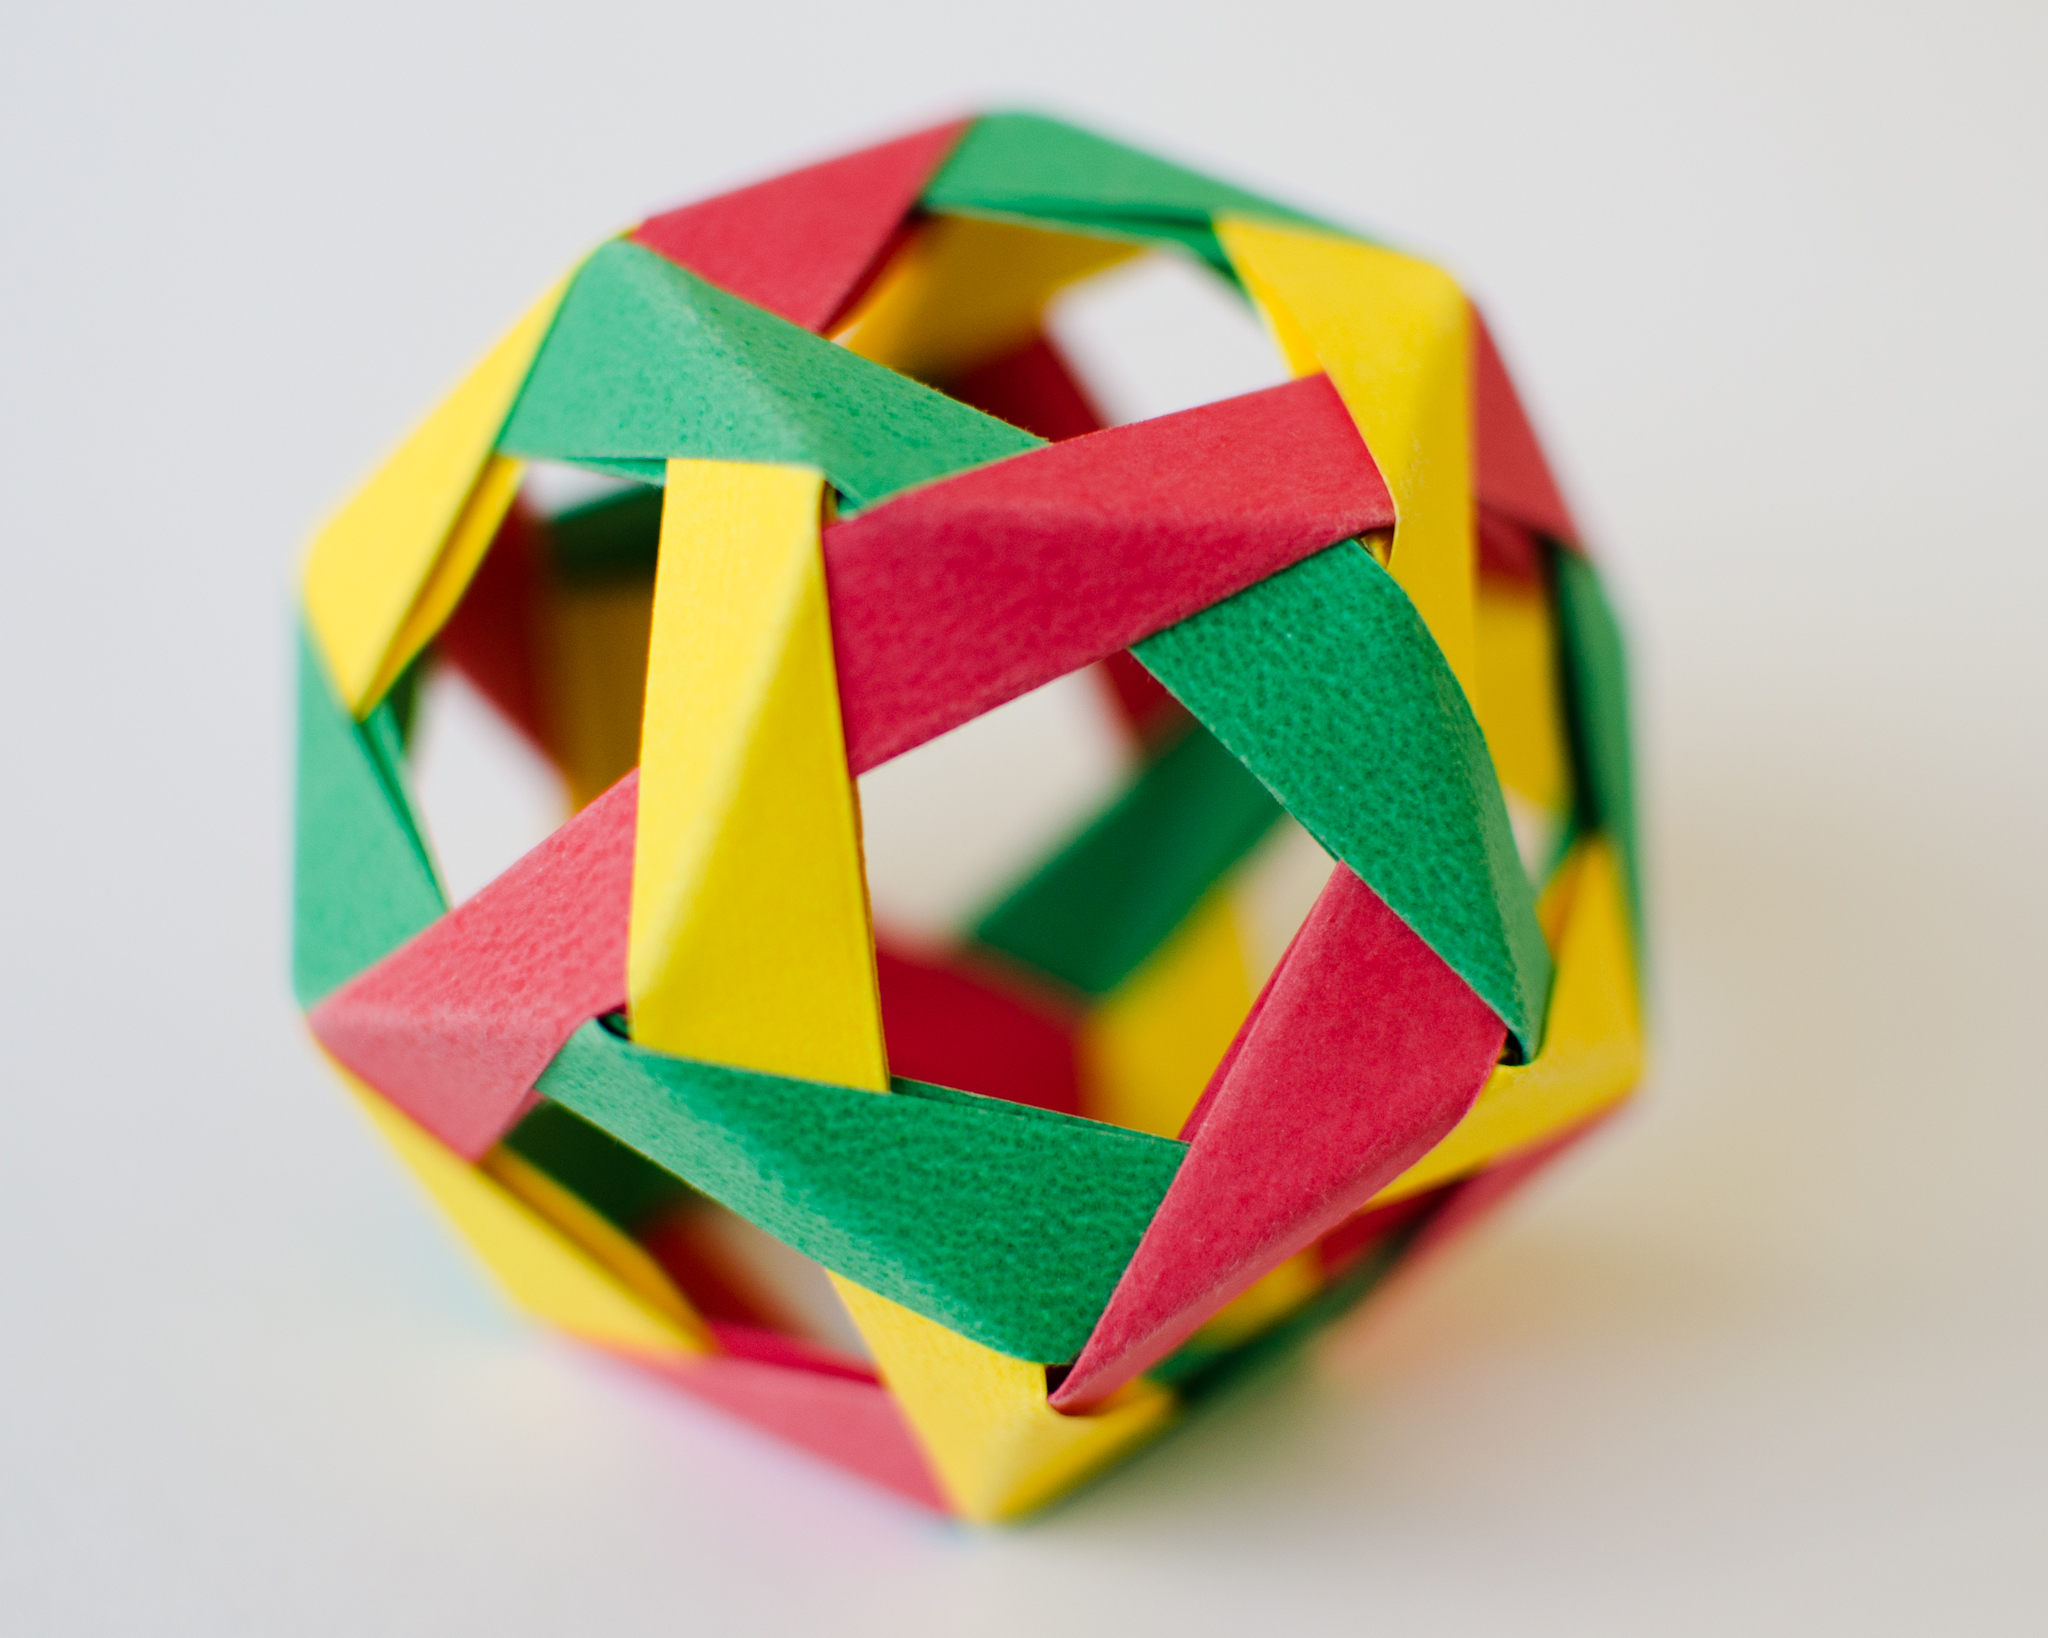 dodecahedron_origami2.jpg